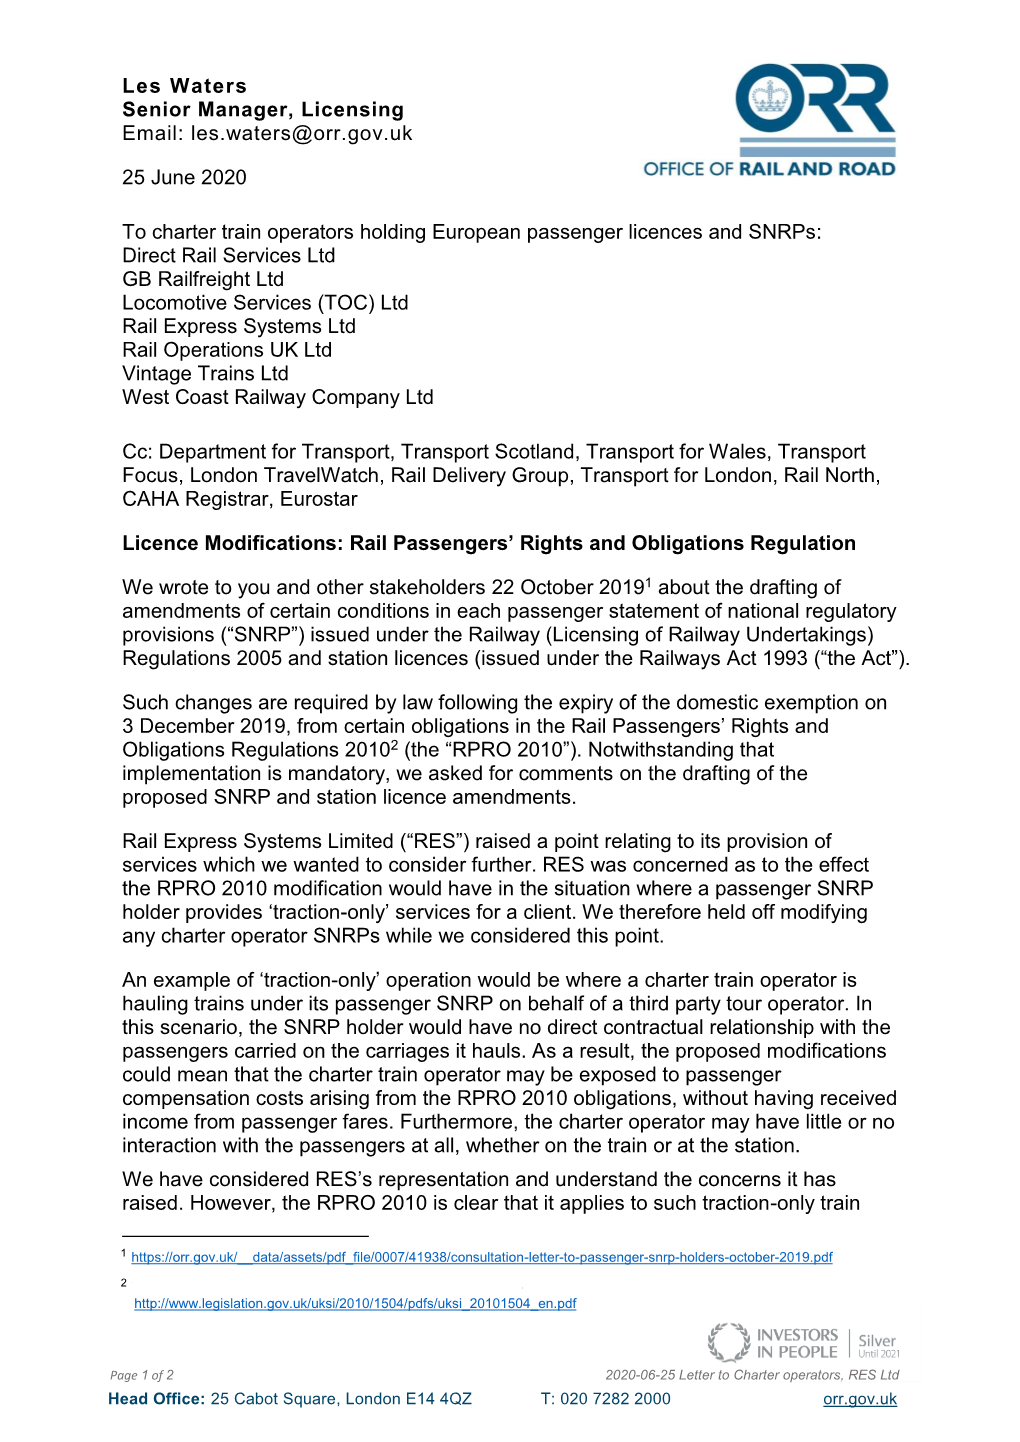 Letter to Charter Train Operators Holding